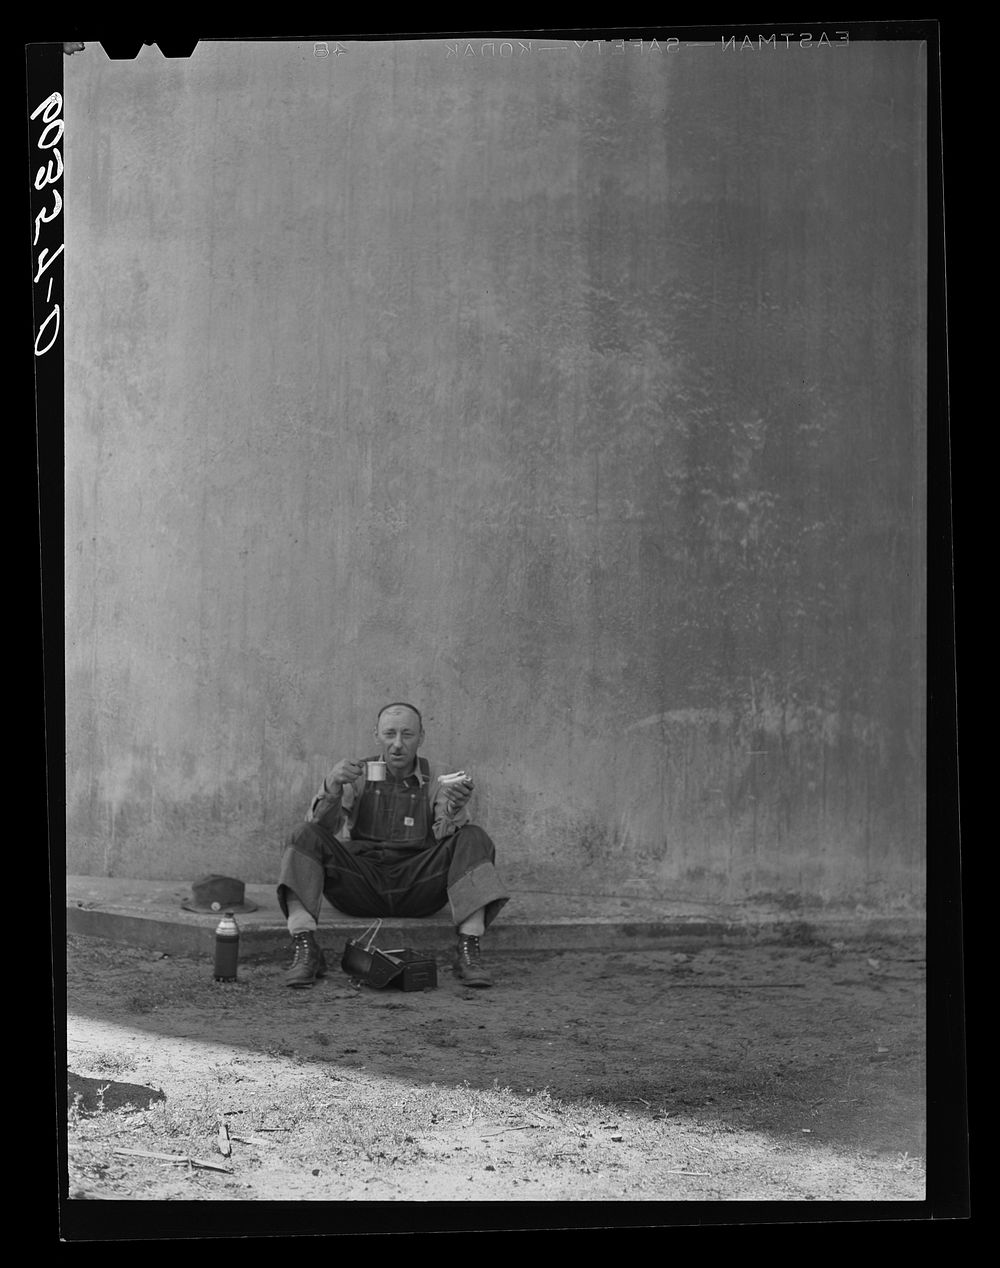 Grain elevator employee at lunch. Minneapolis, Minnesota. Sourced from the Library of Congress.